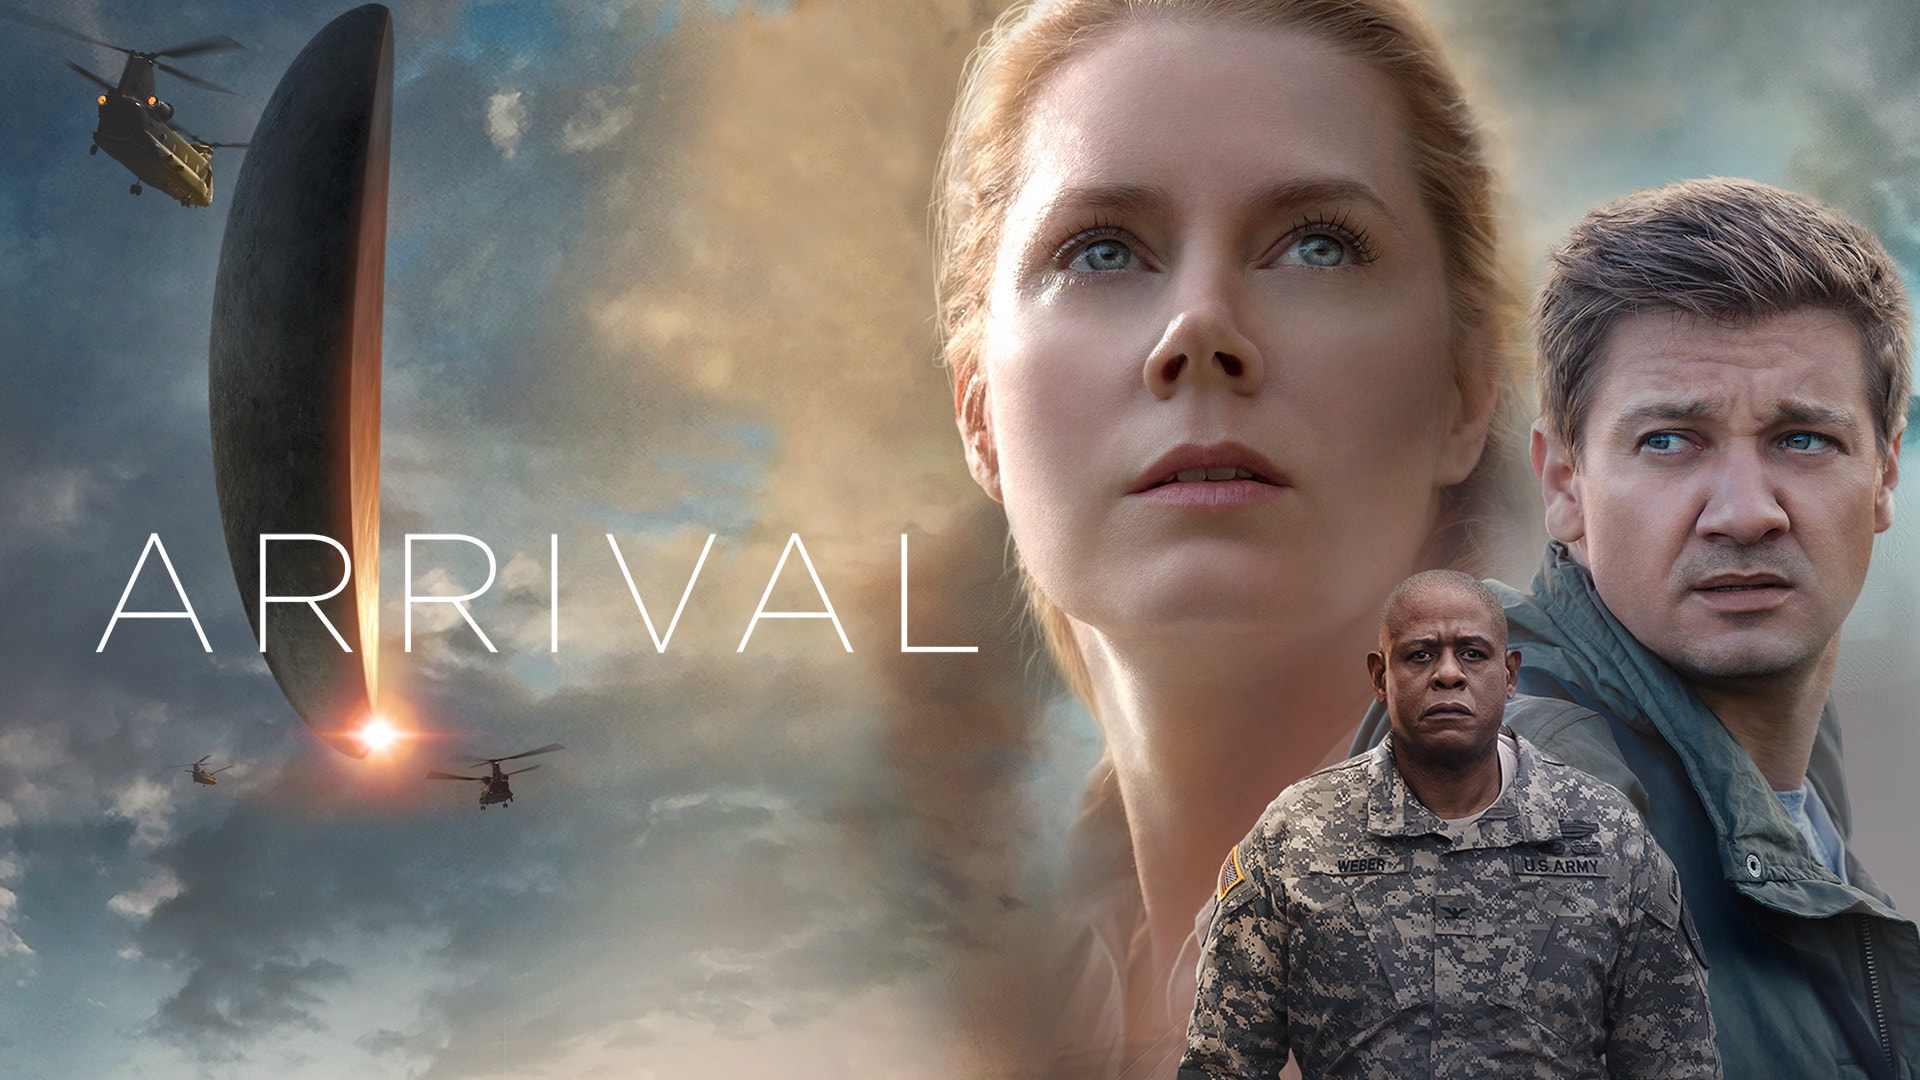 Watch Arrival Online | Stream Full Movies